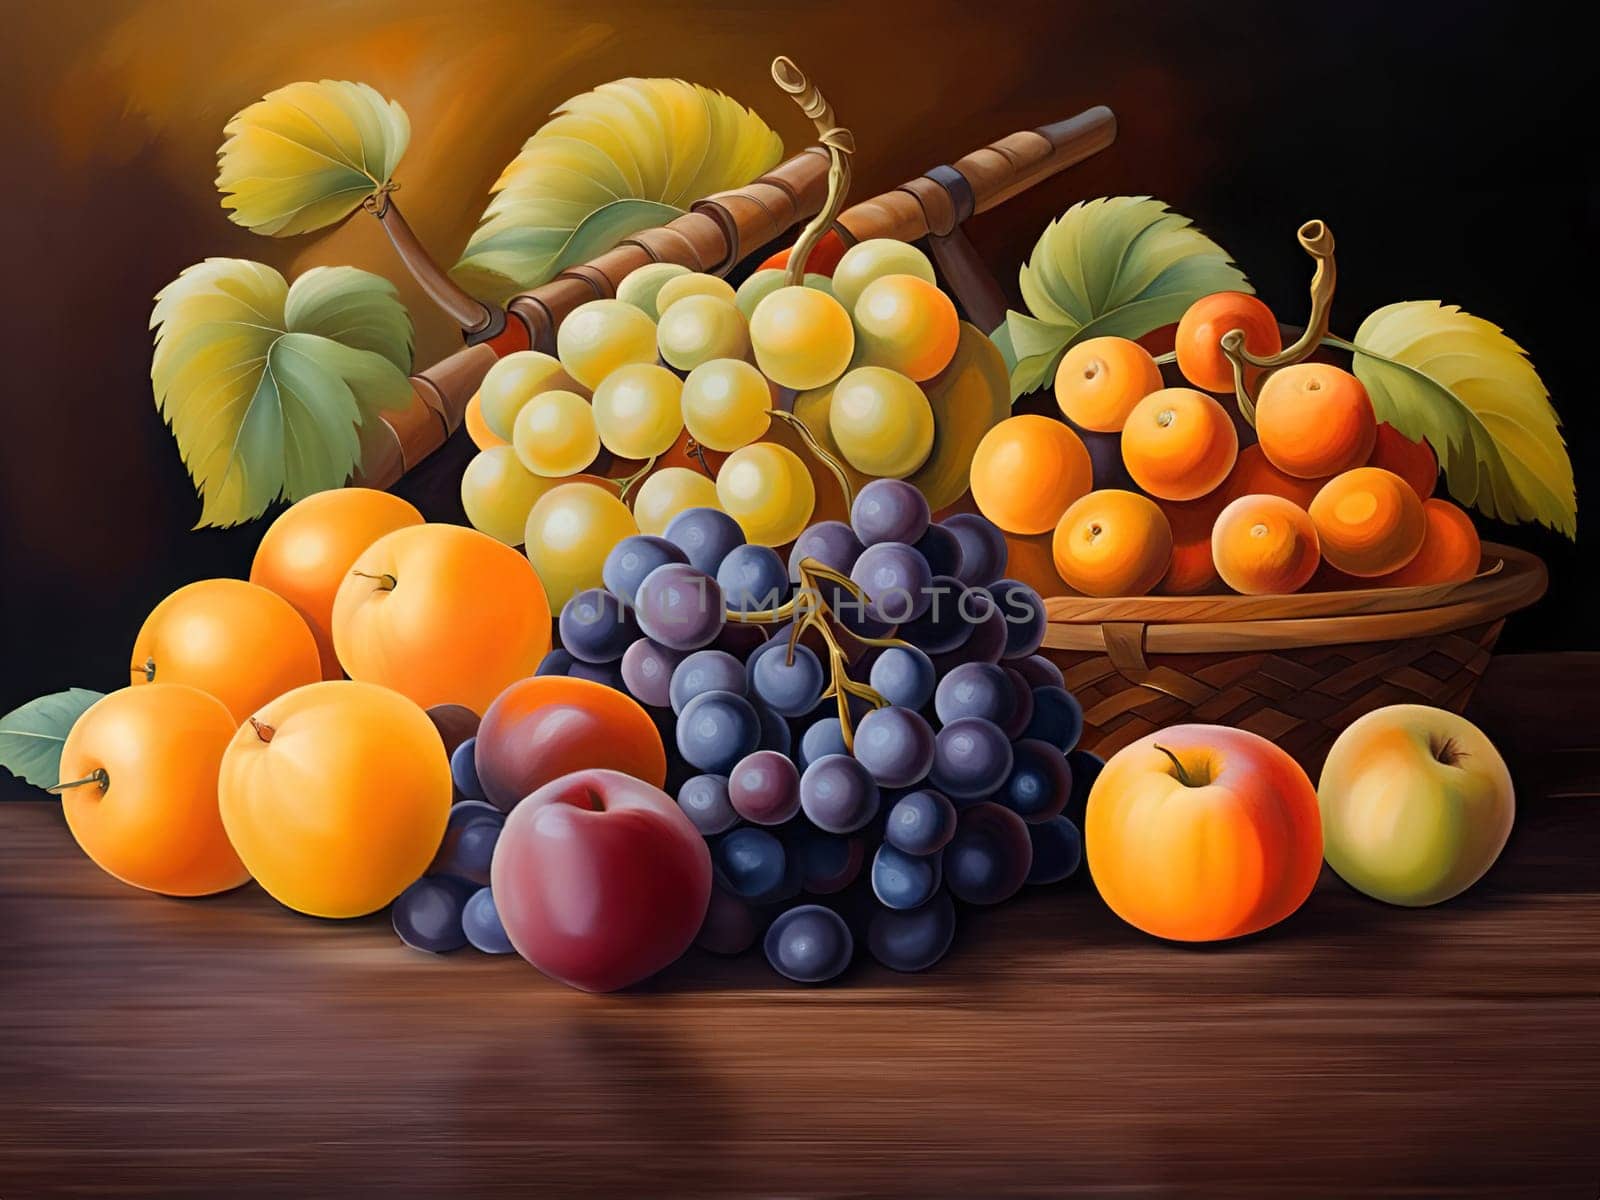 Still life compositions reflecting the colorful and delicious world of fruits by yilmazsavaskandag